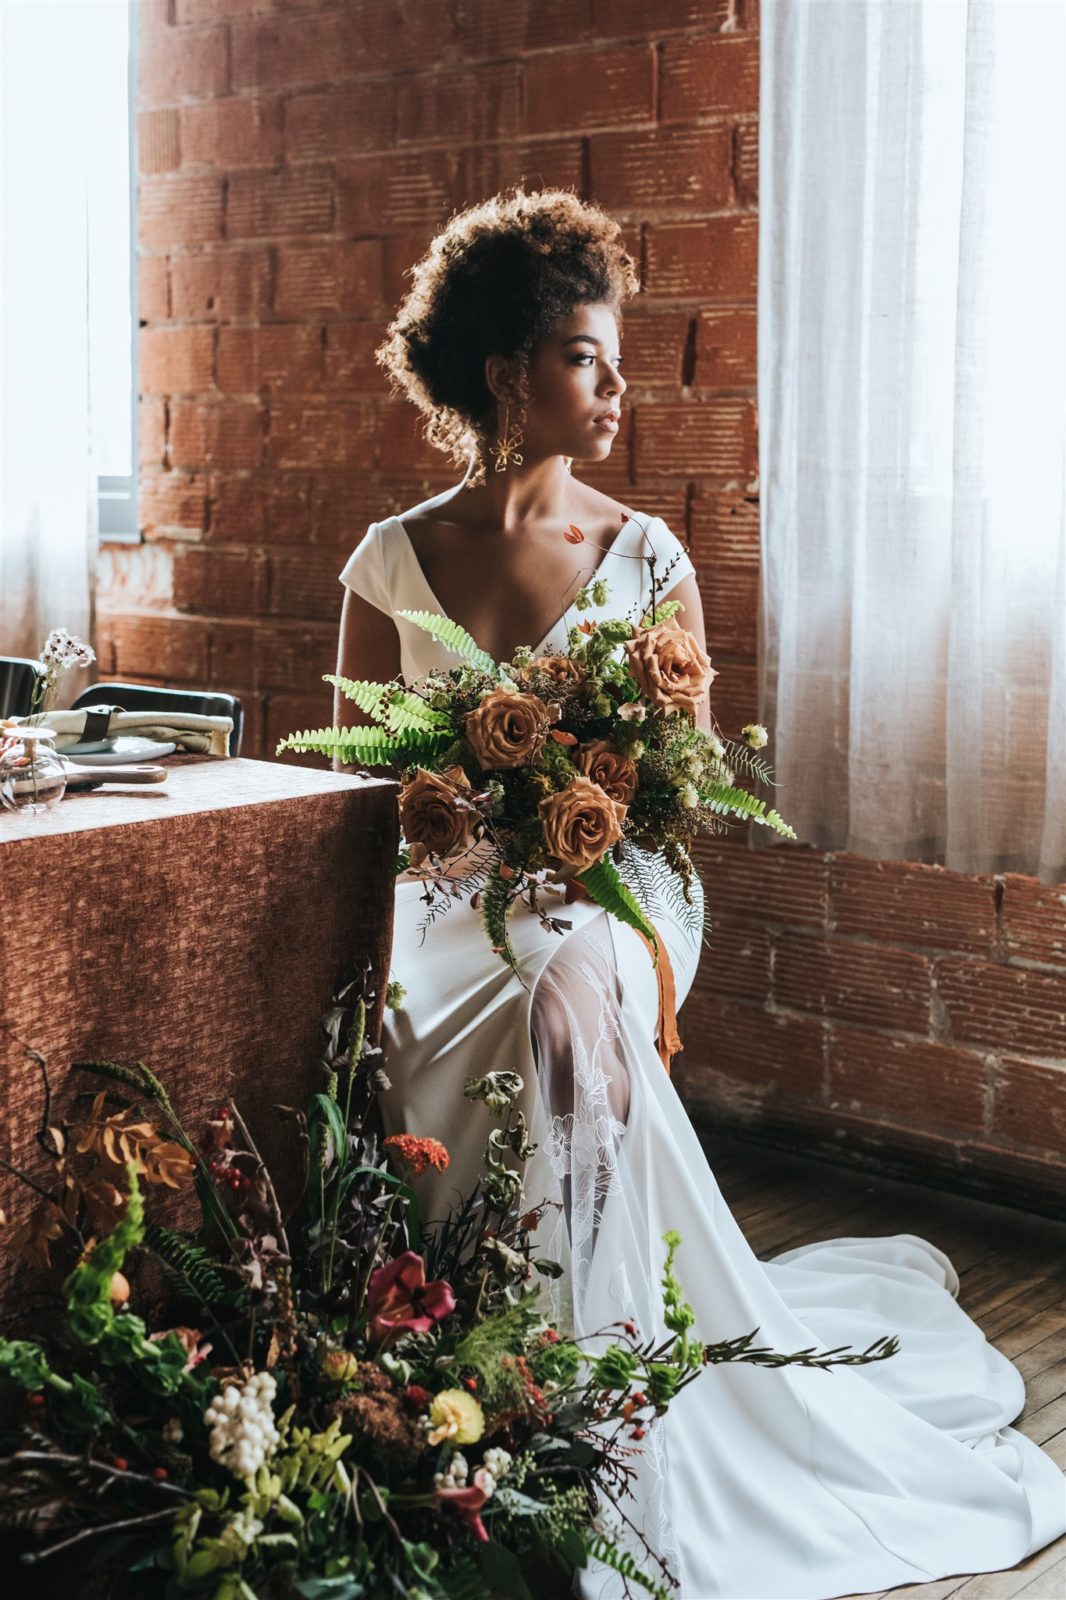 Bridal editorial at Bridgette Bar in Calgary Alberta featuring a sleek gown, earthy fall colours and wild organic florals